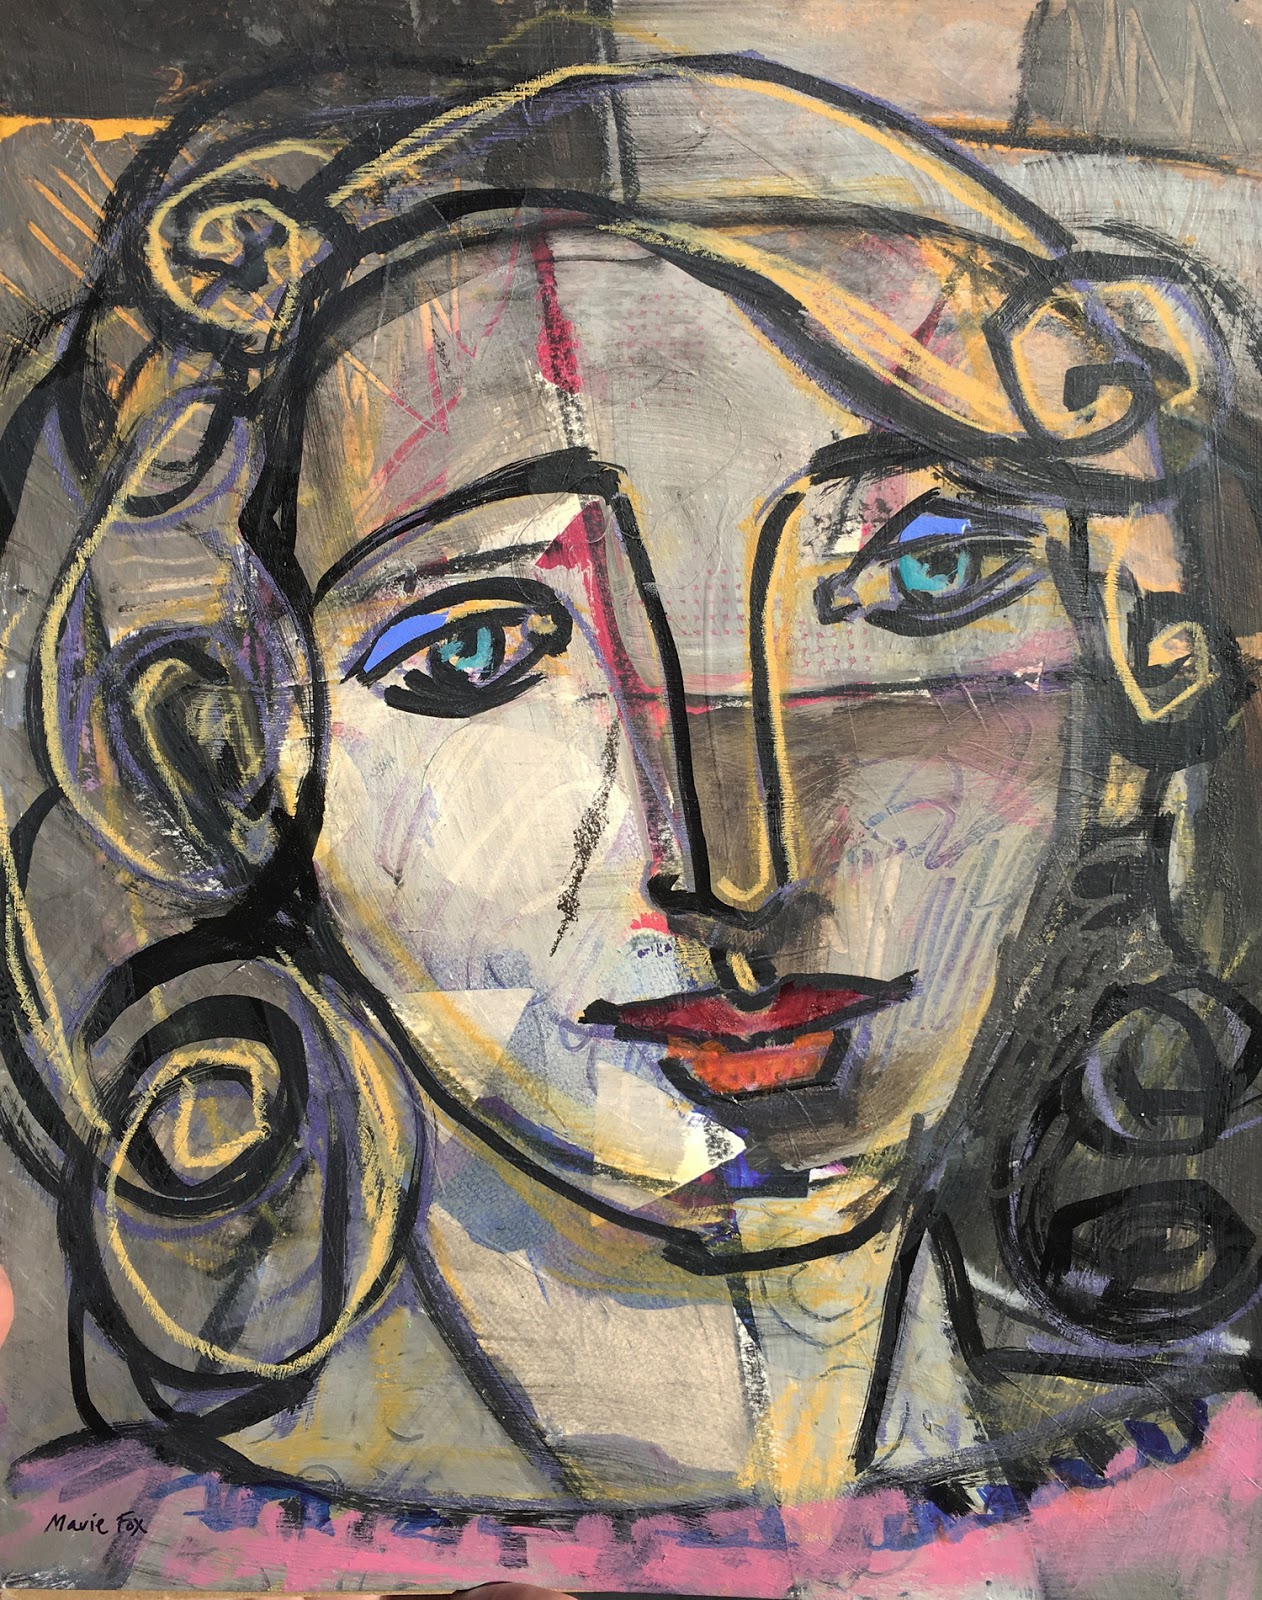 Picasso's Girl, figurative drawing painting on paper, contemporary ...